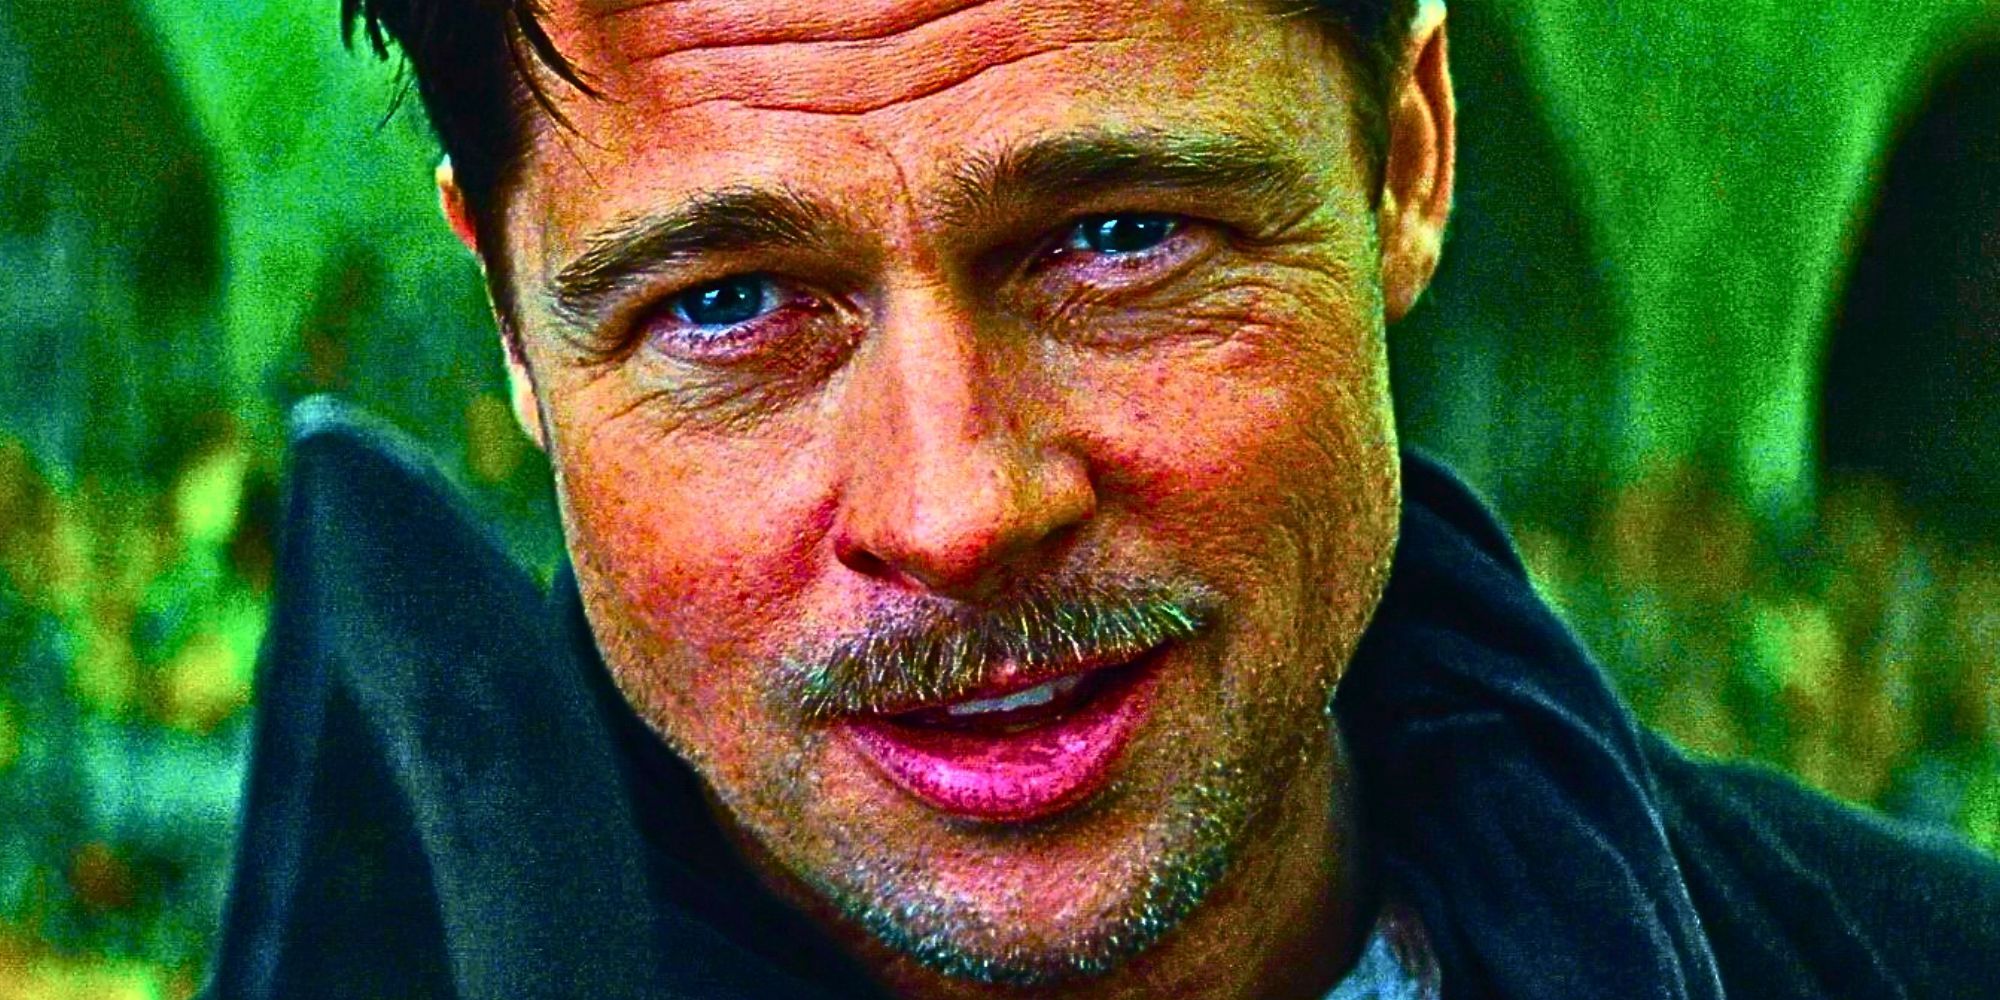 Brad Pitt’s 7 War Movies, Ranked From Worst To Best